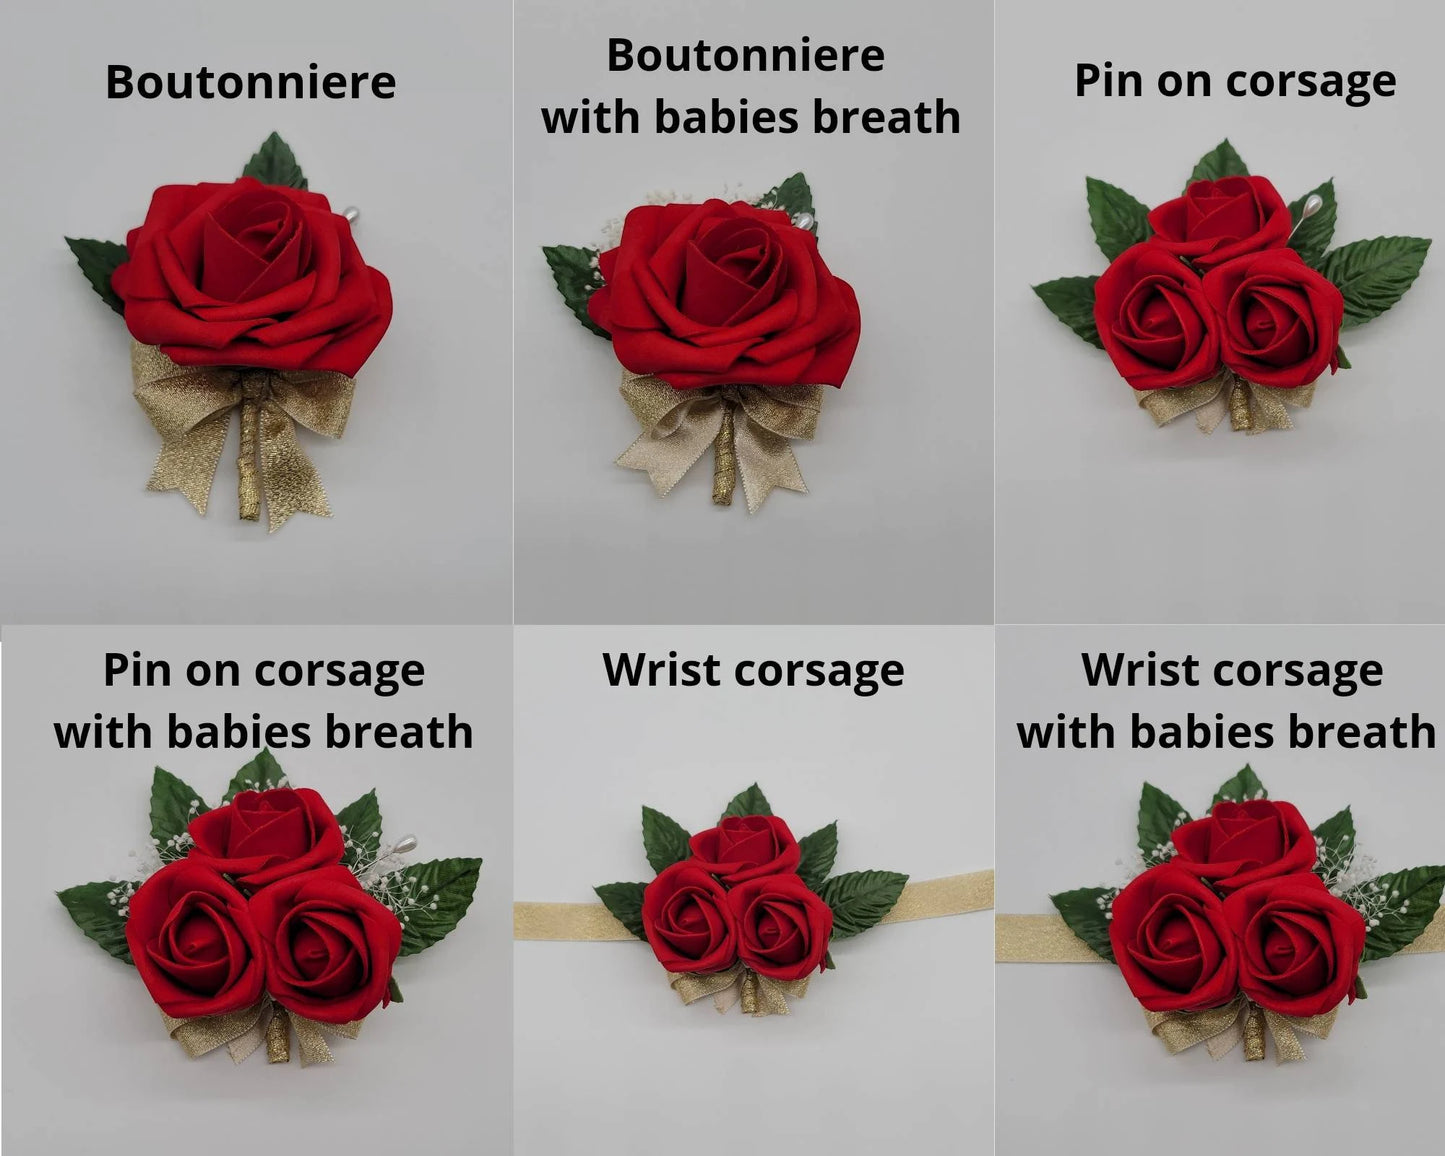 Red, White, and Gold Boutonnieres and Corsages